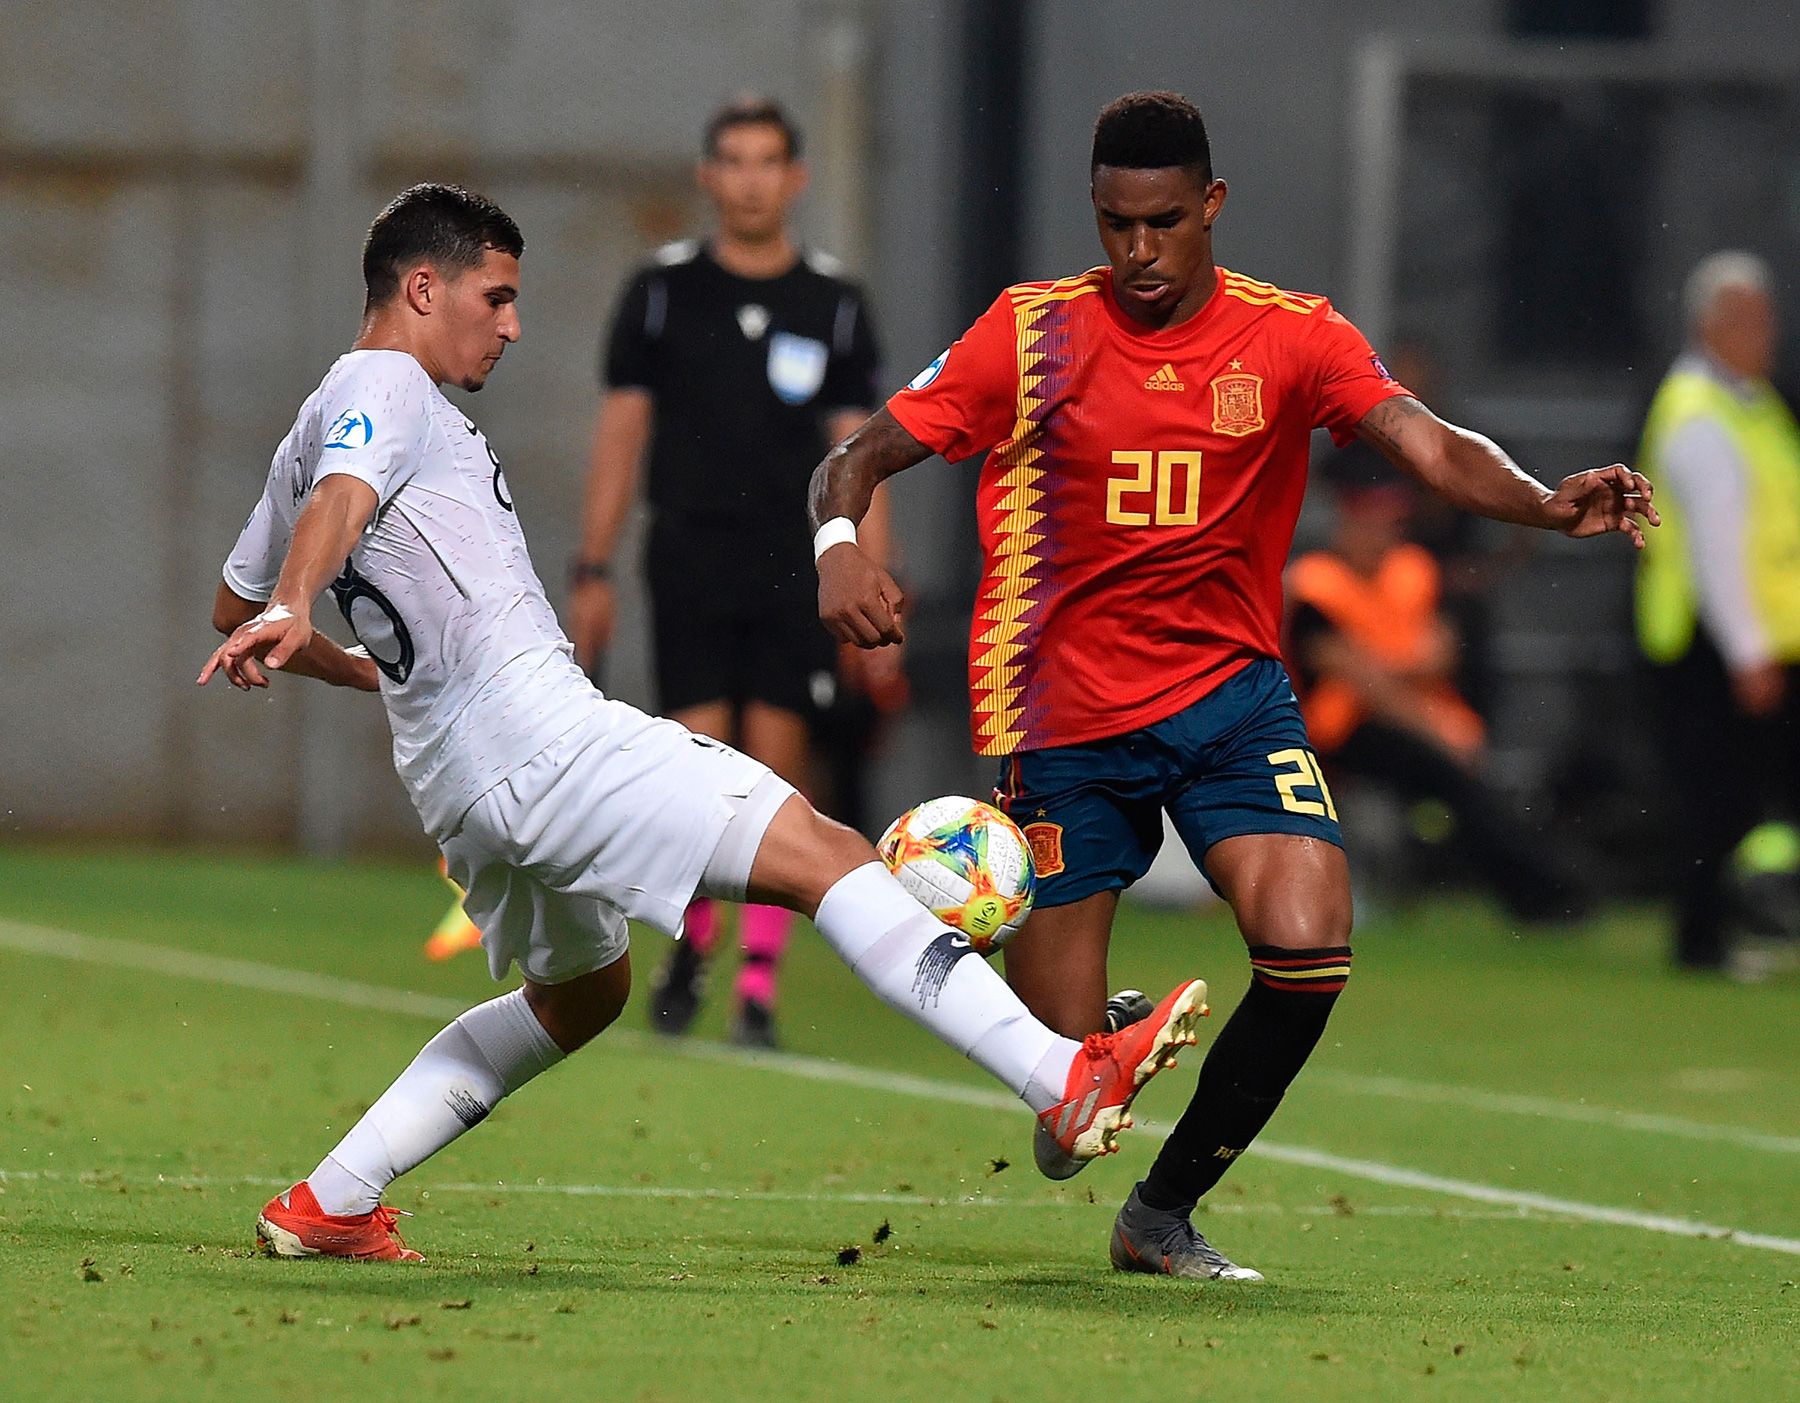 Junior Firpo in a match with Spain under 21